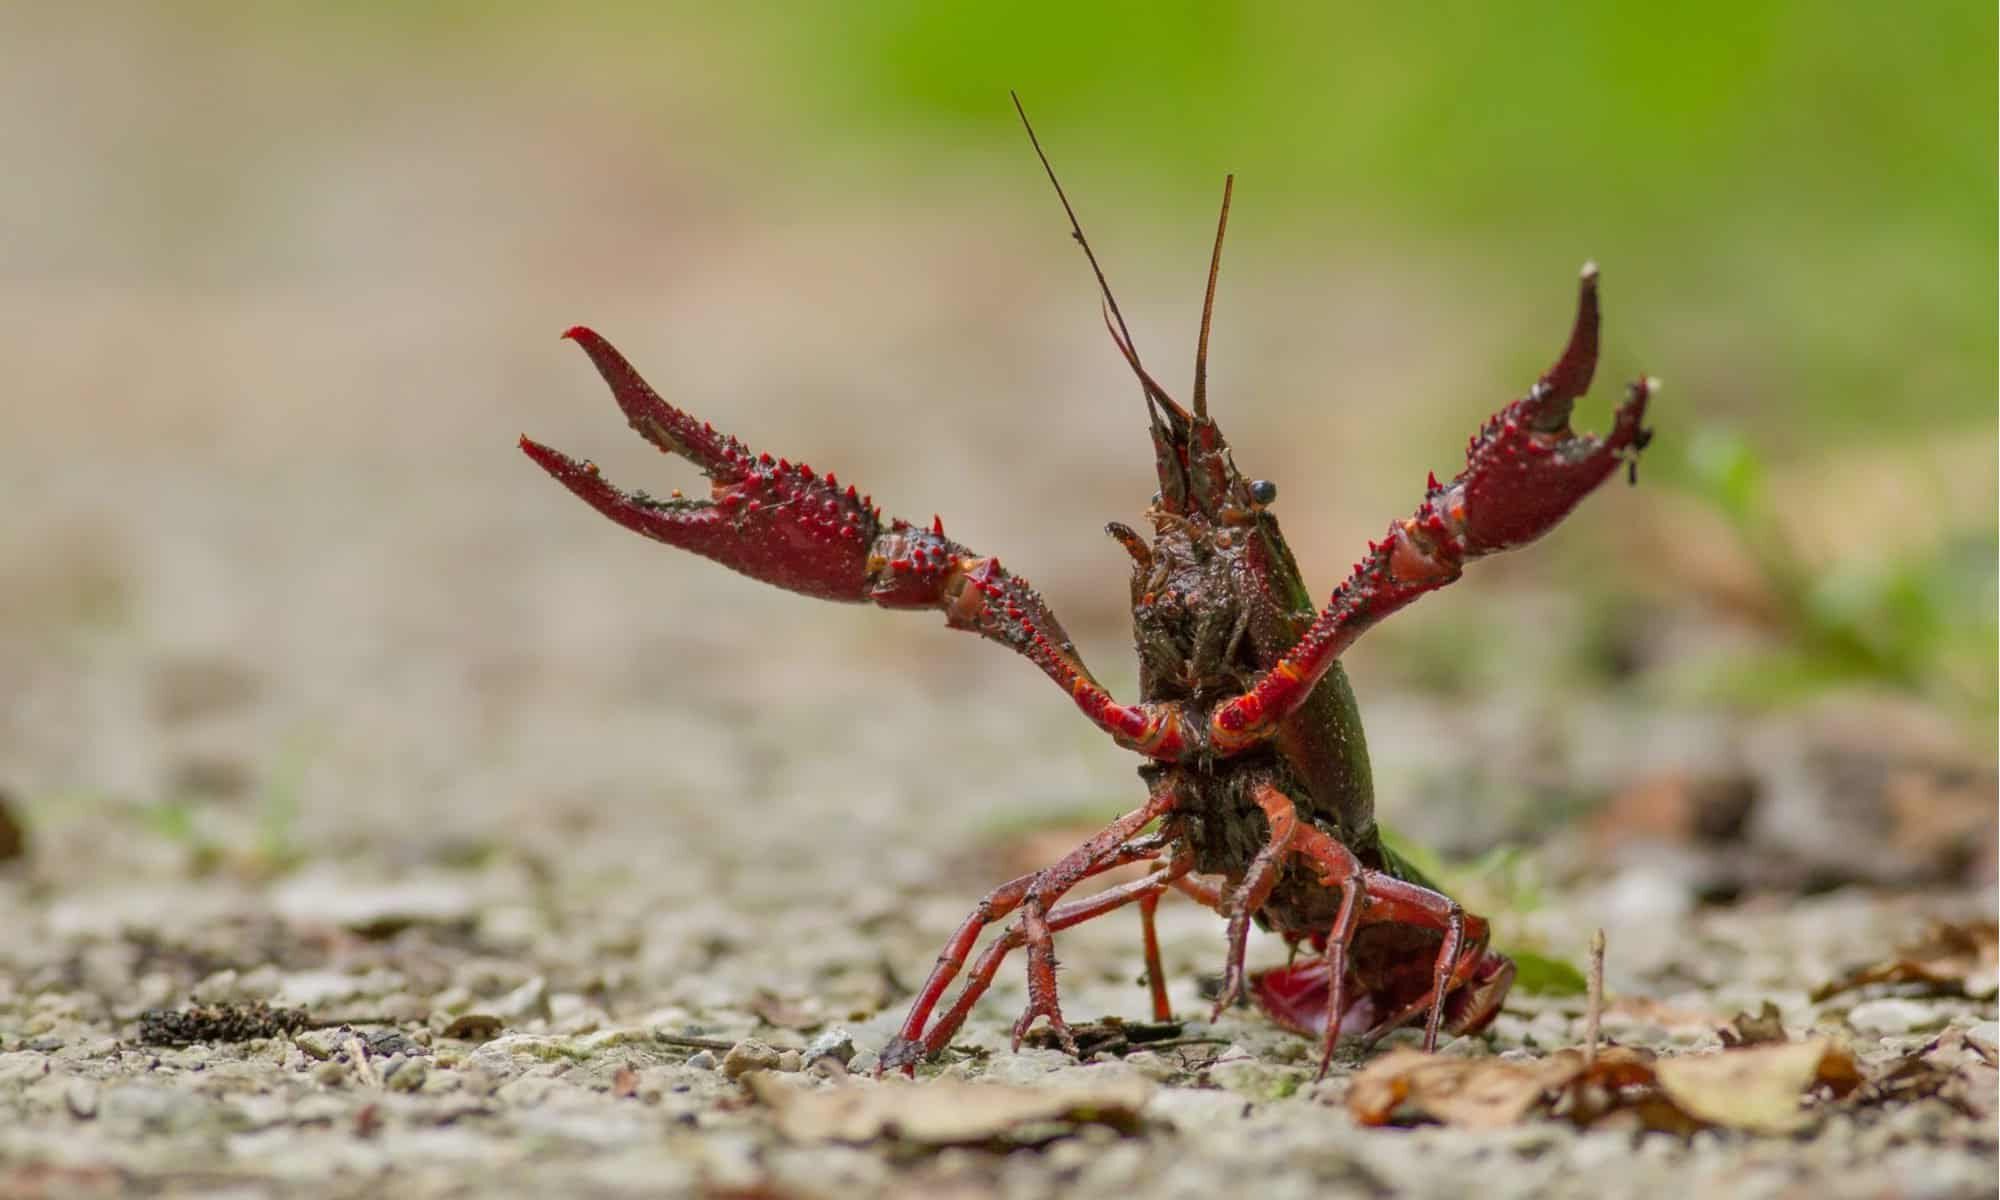 Red Swamp Crayfish - Pincers Spread